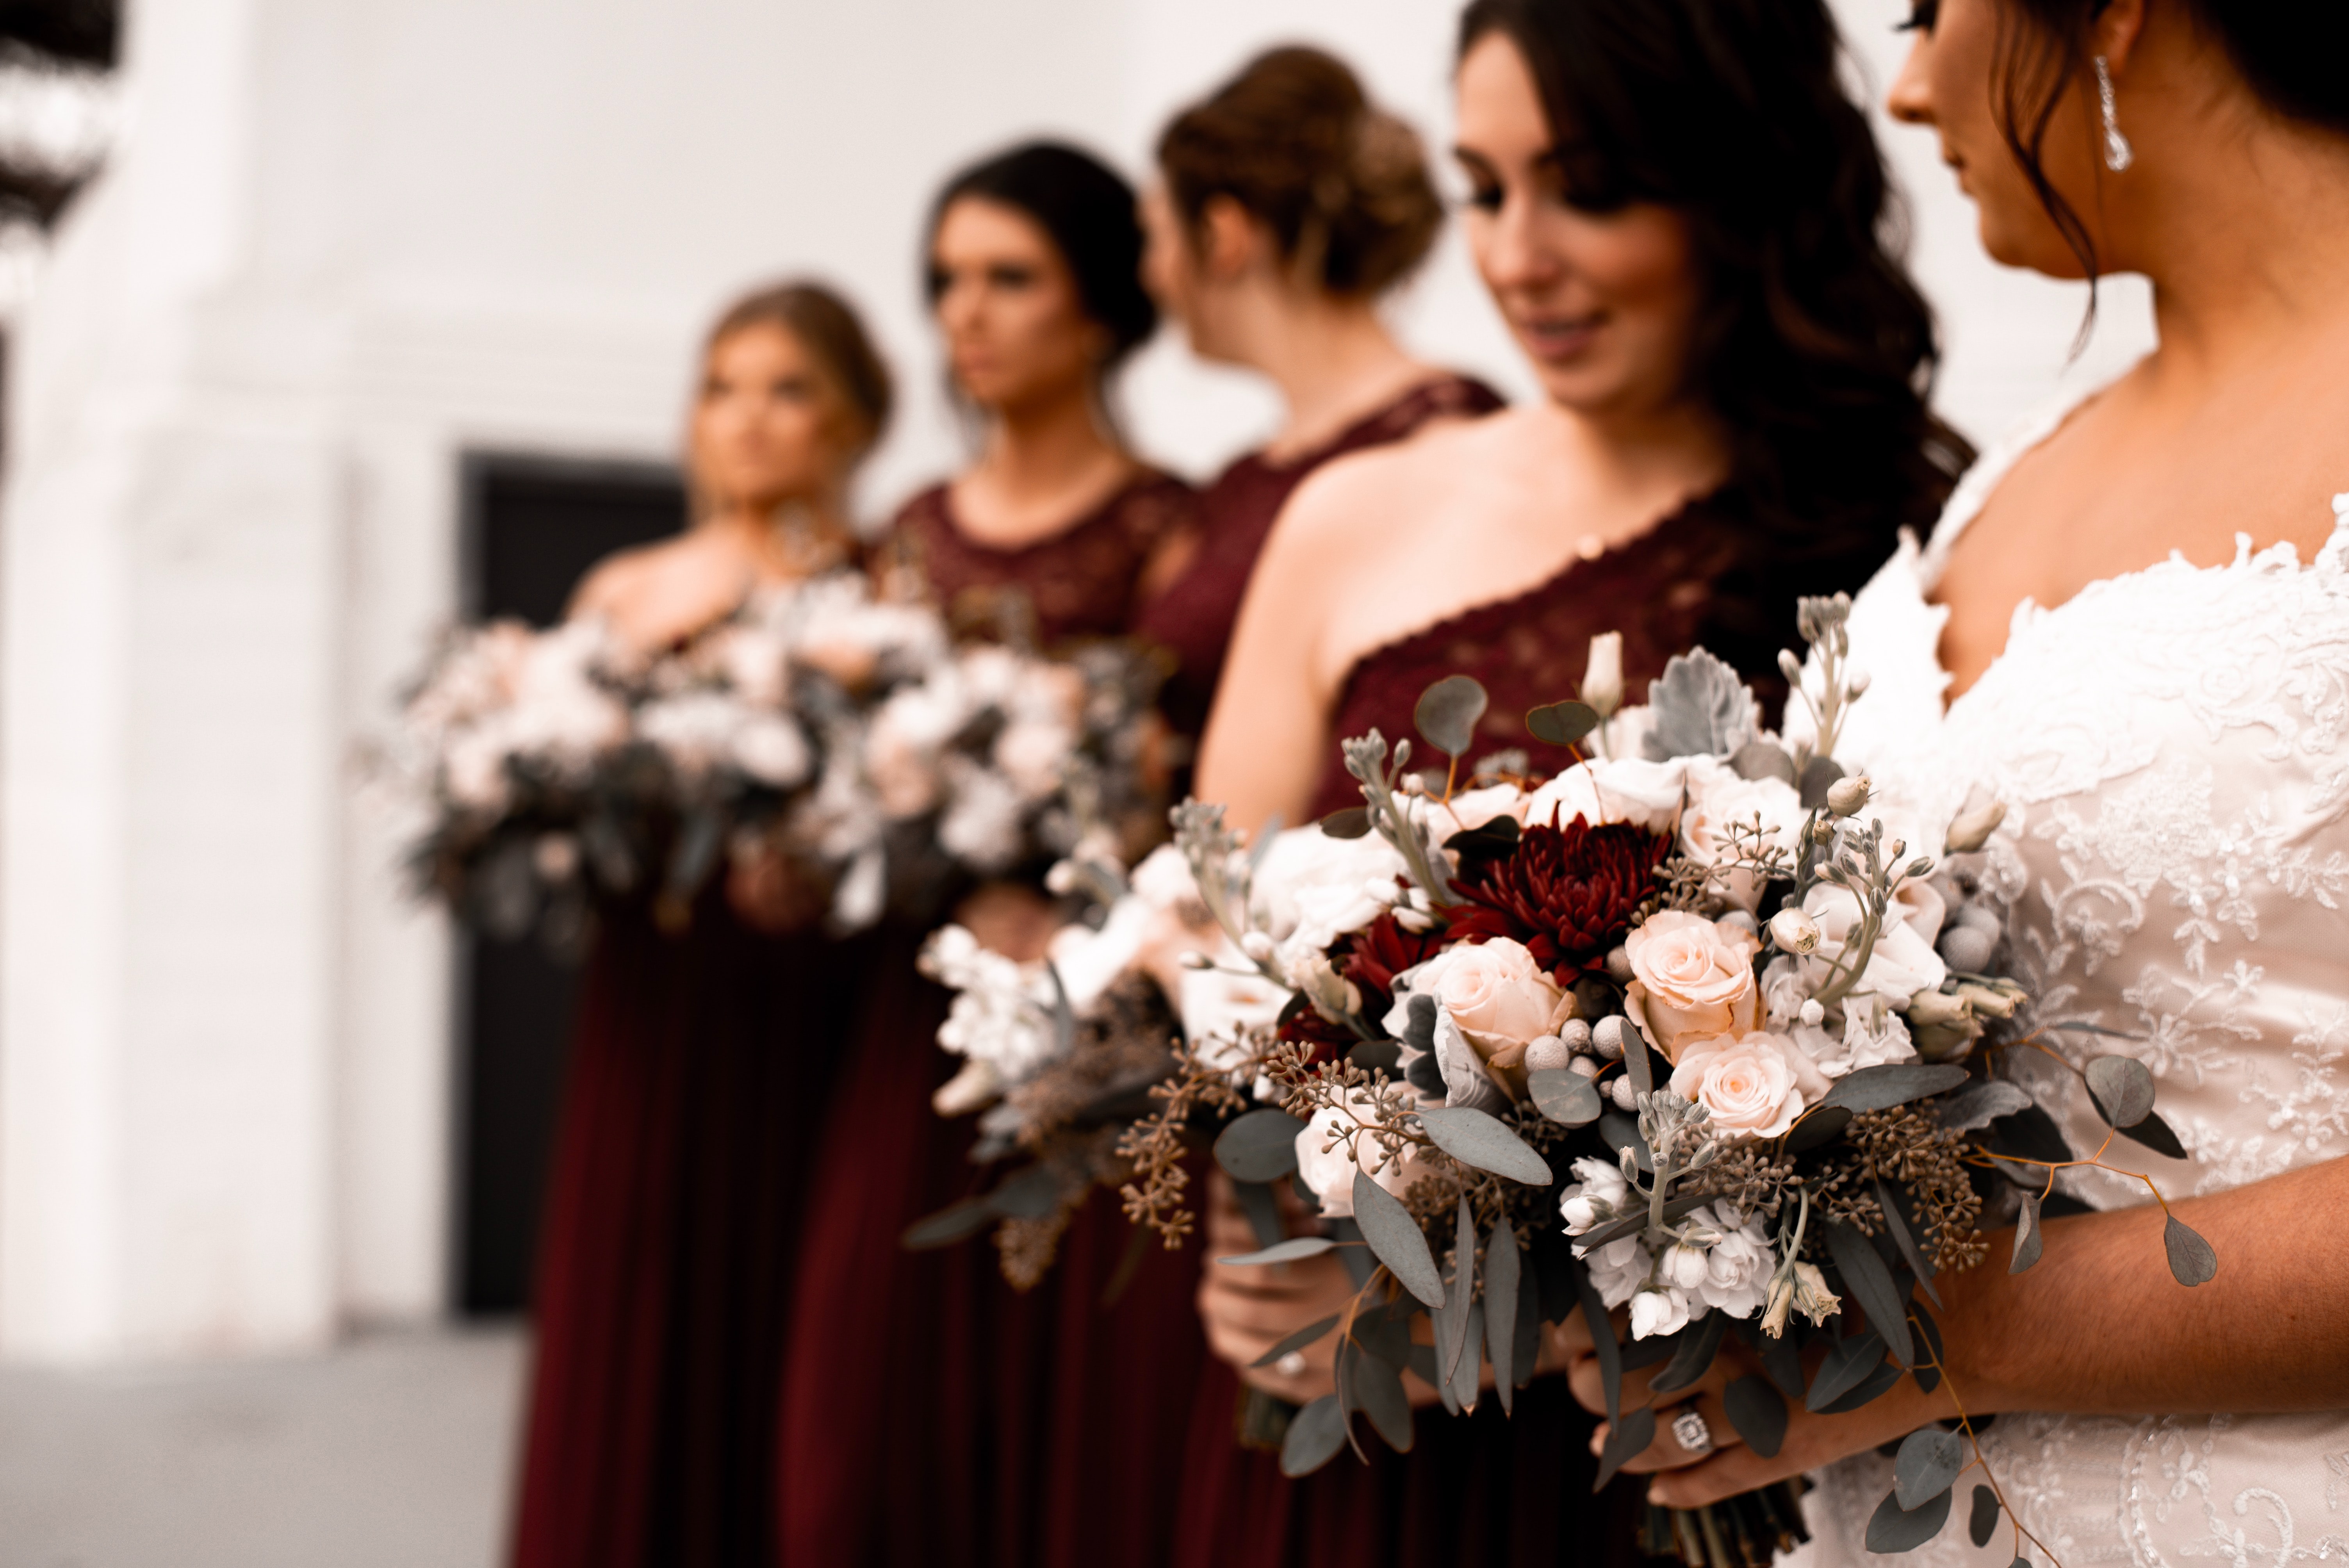 How to Deal If You HATE Your Bridesmaid Dress